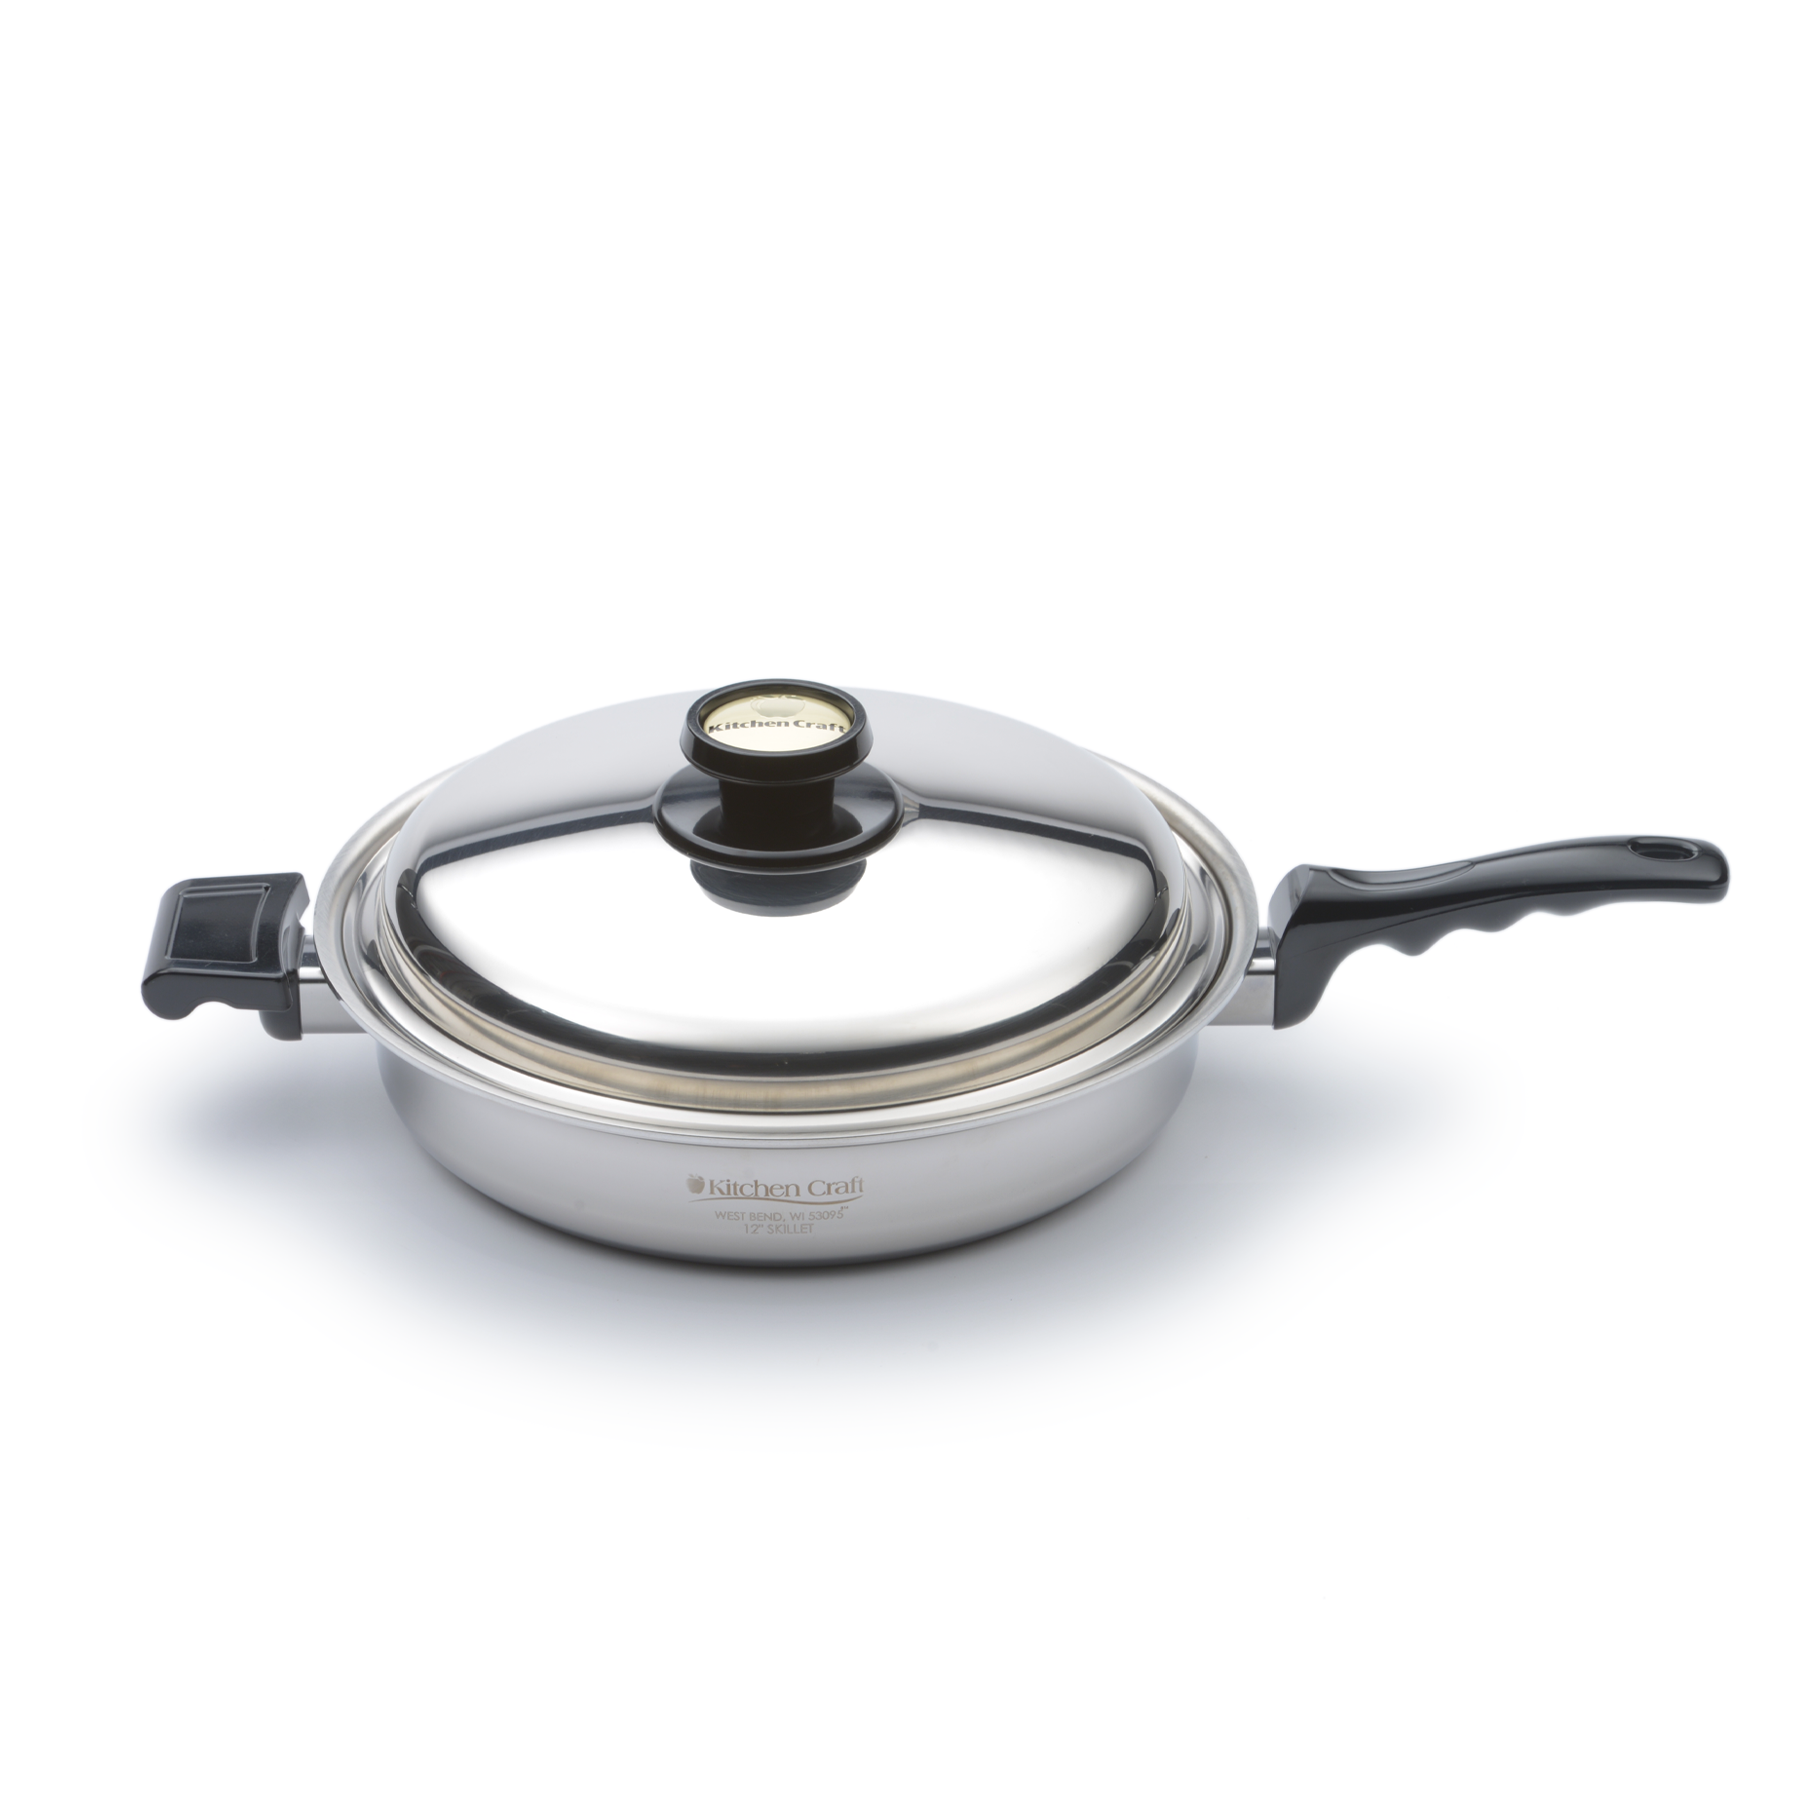 Cookworld 11.5 Large Skillet W Lid, Surgical Stainless Steel Fatless  Cooking